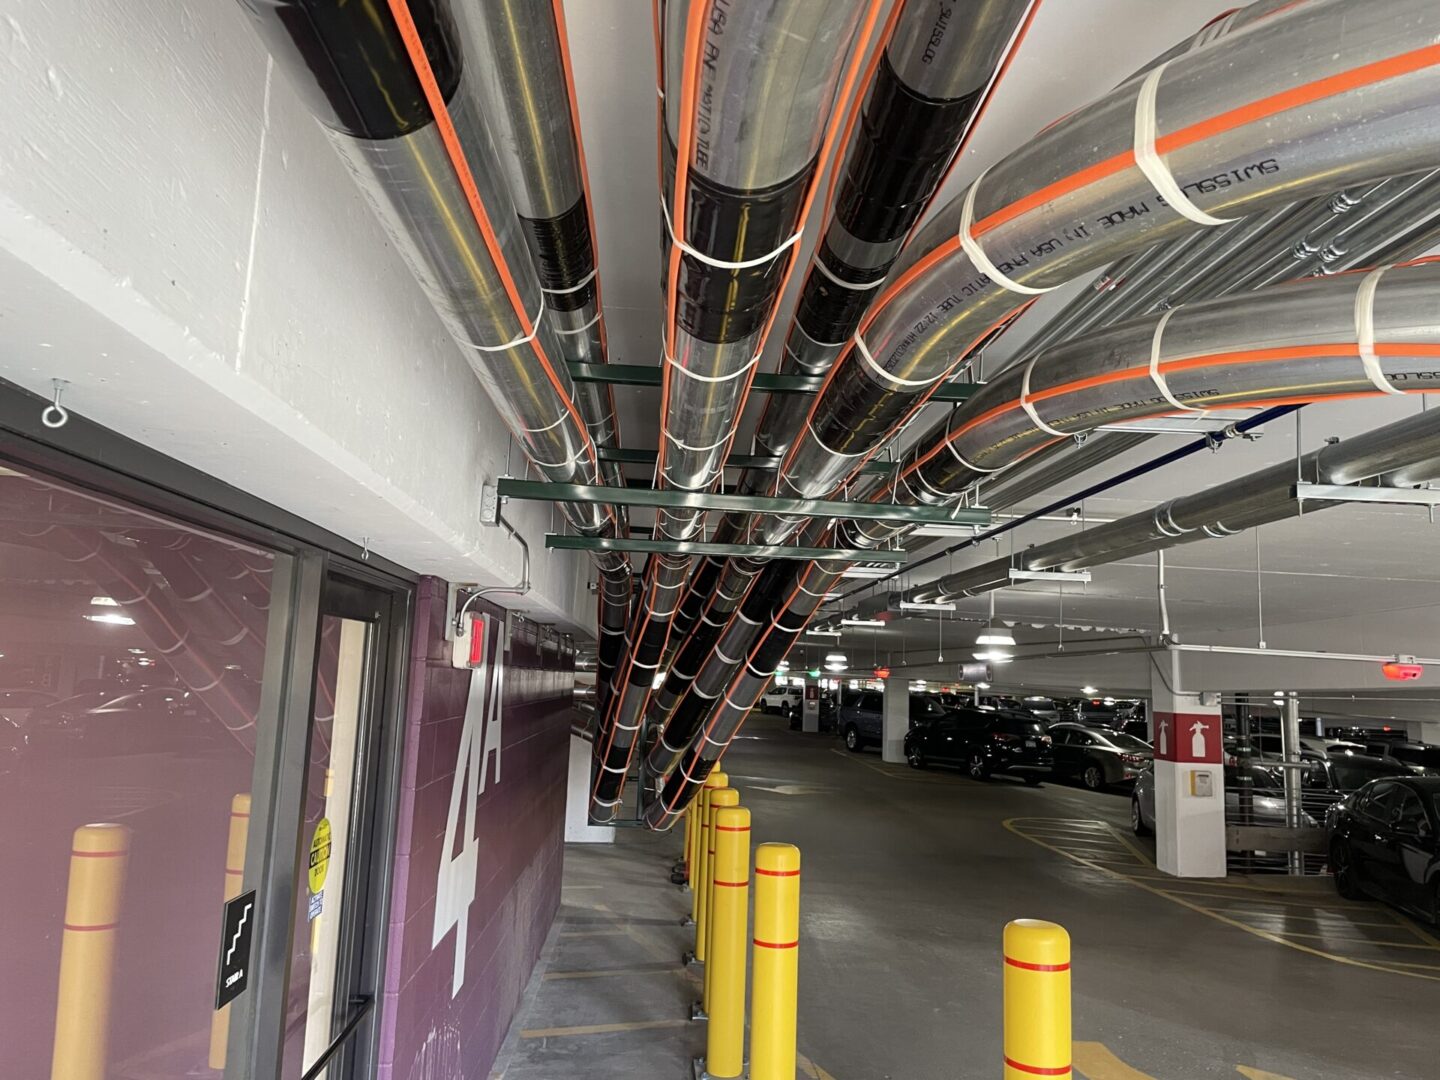 Multiple electrical pipes with orange tape